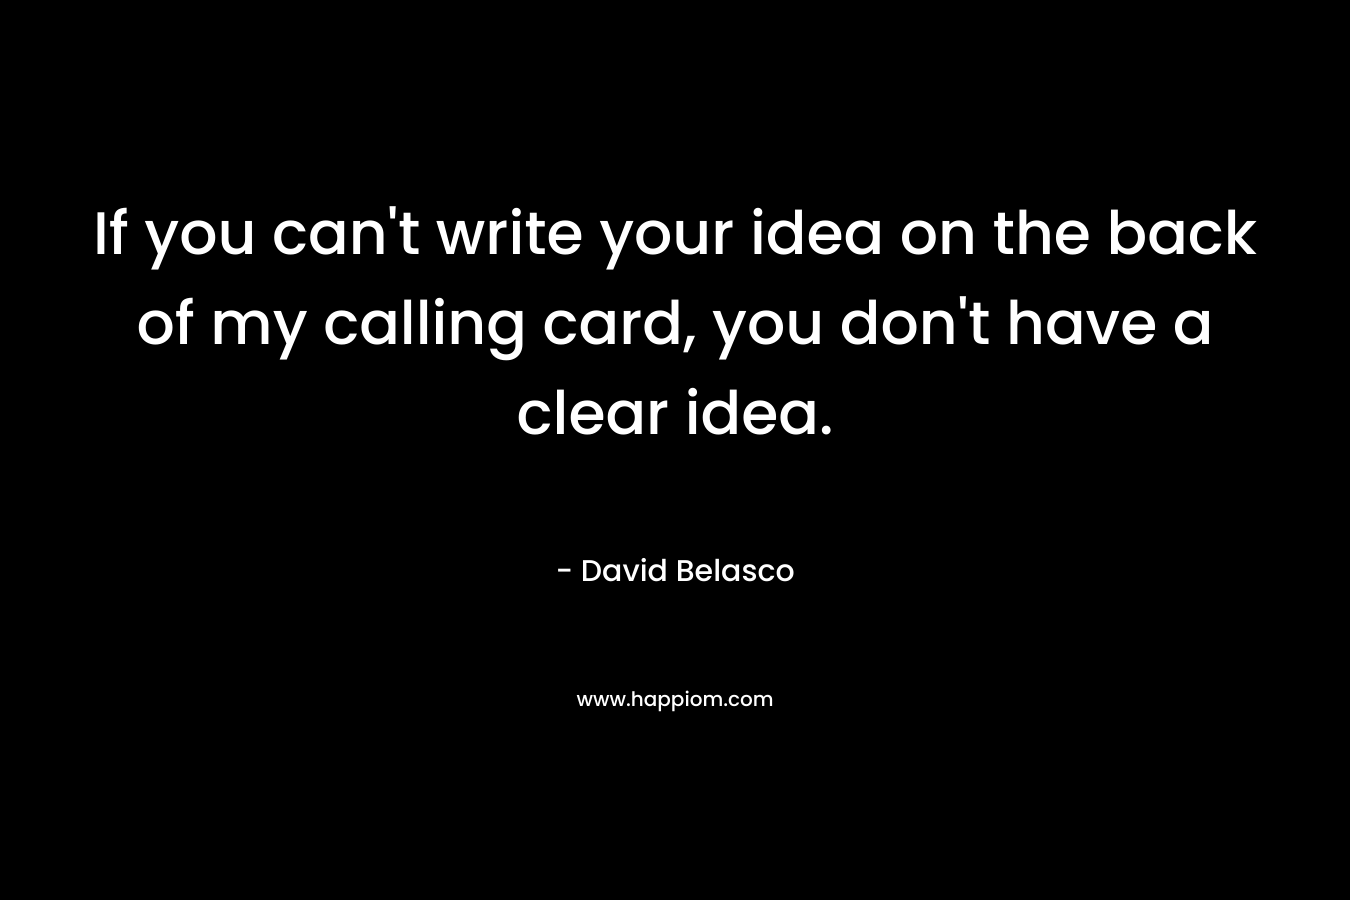 If you can’t write your idea on the back of my calling card, you don’t have a clear idea. – David Belasco